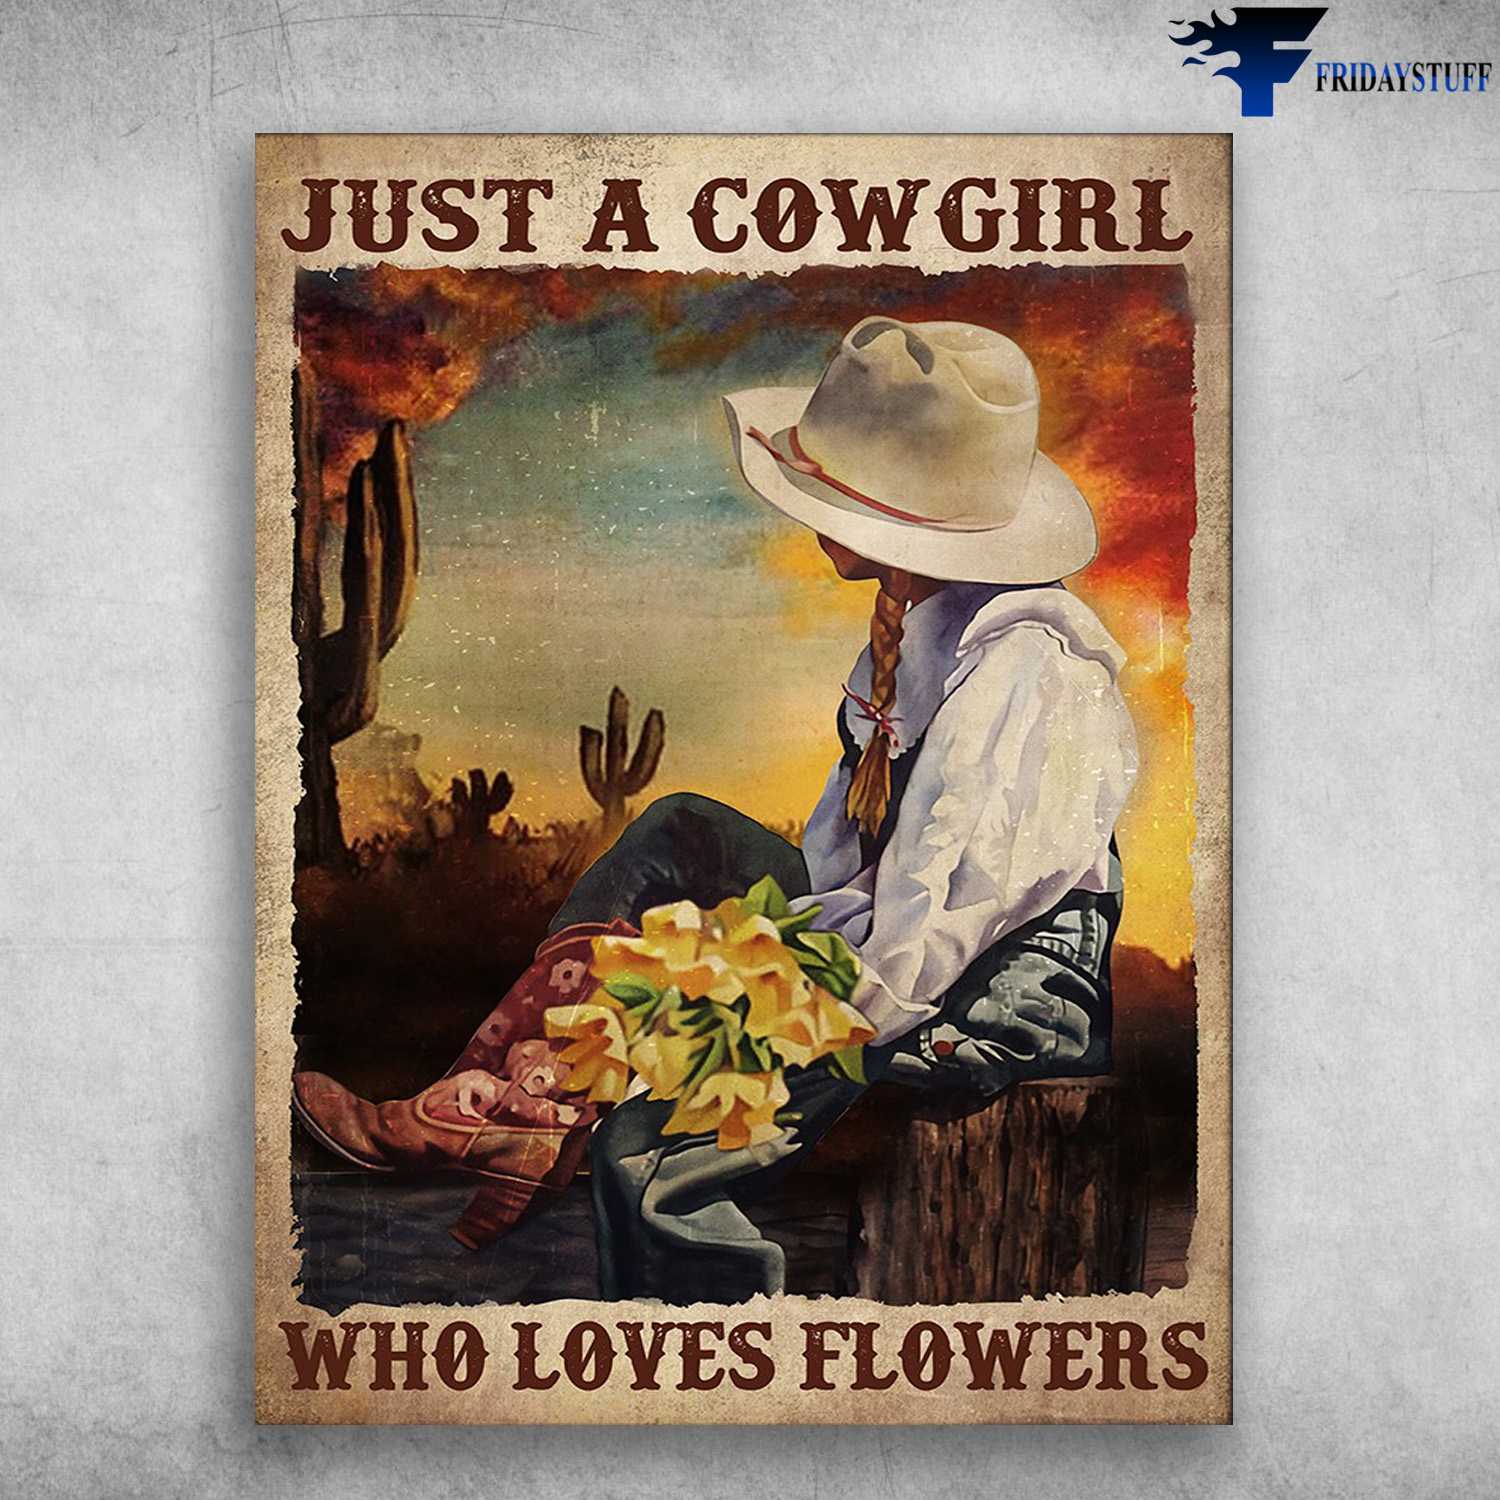 Cowgirl Poster, Flower Lover - Just A Cowgirl, Who Loves Flowers